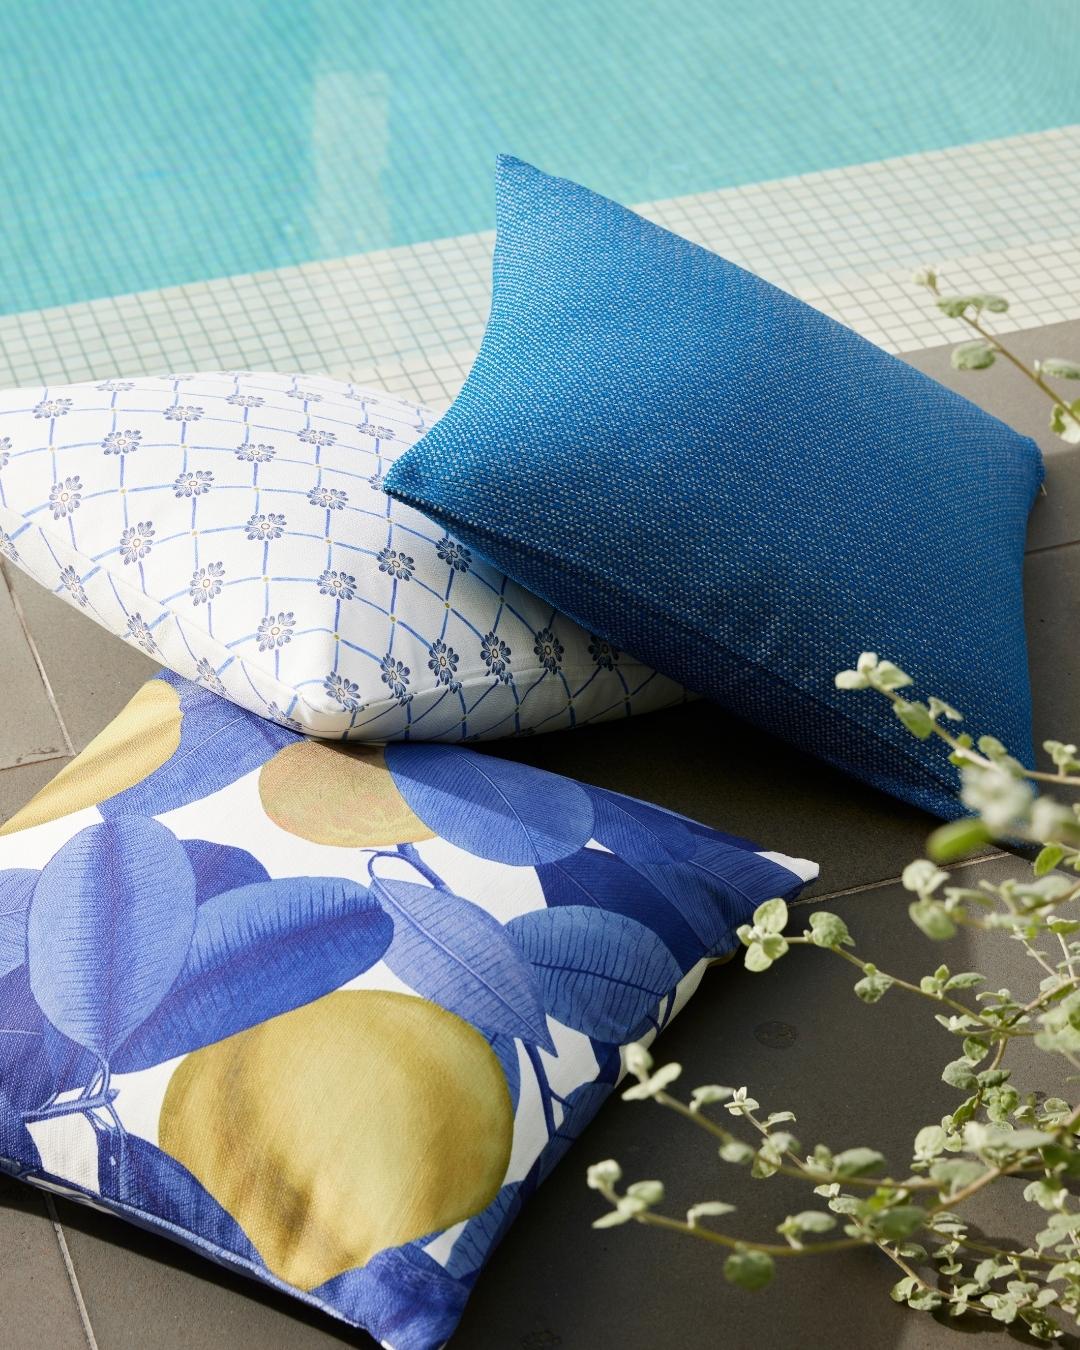 Elba cushion in white and blue geometric pattern with cobalt blue cushion and blue and white cushion wit h yellow lemons